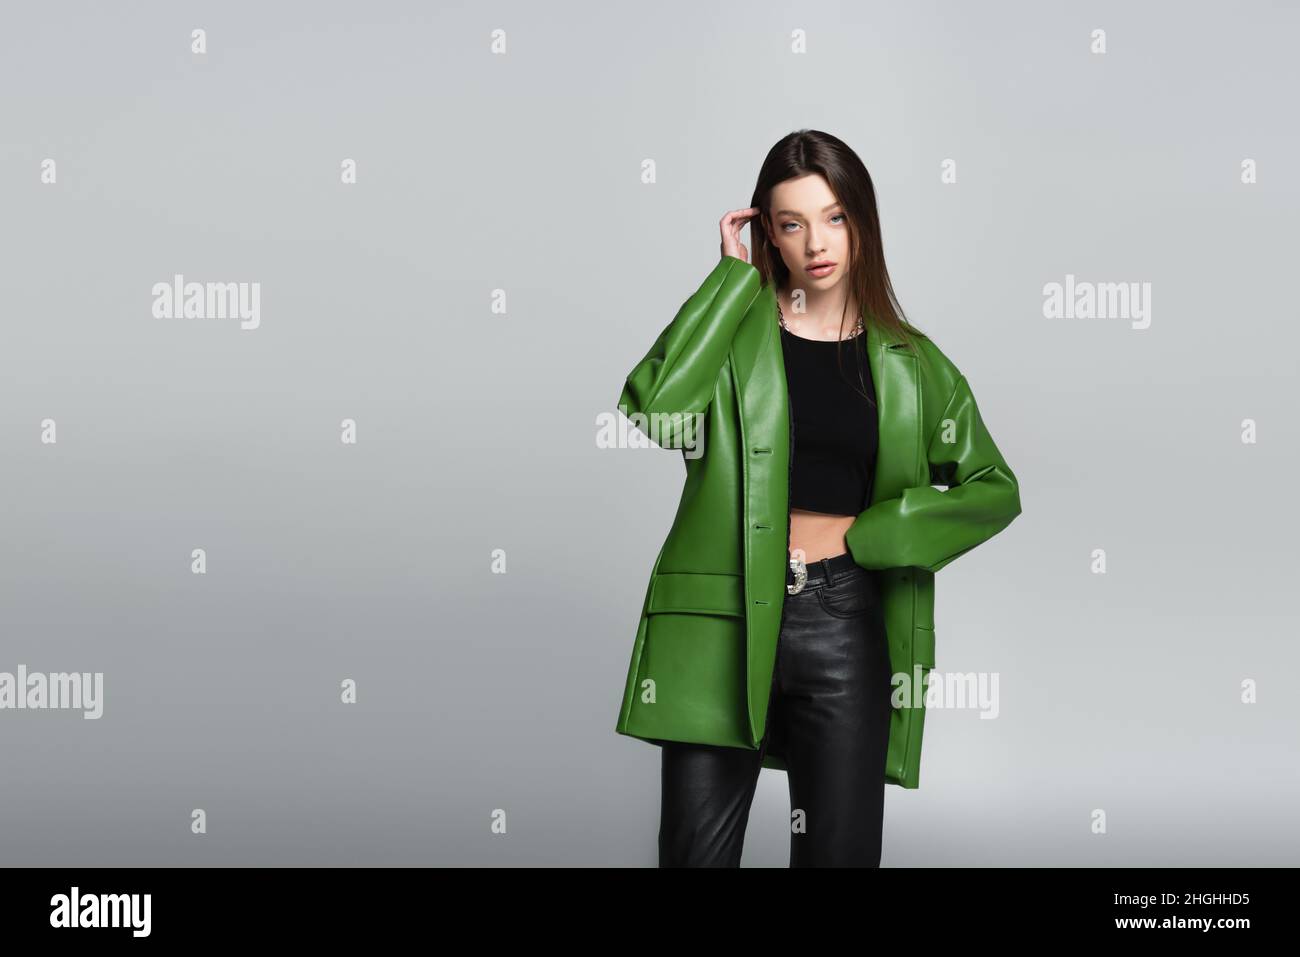 pretty woman in green jacket and black trousers standing with hand on waist isolated on grey Stock Photo